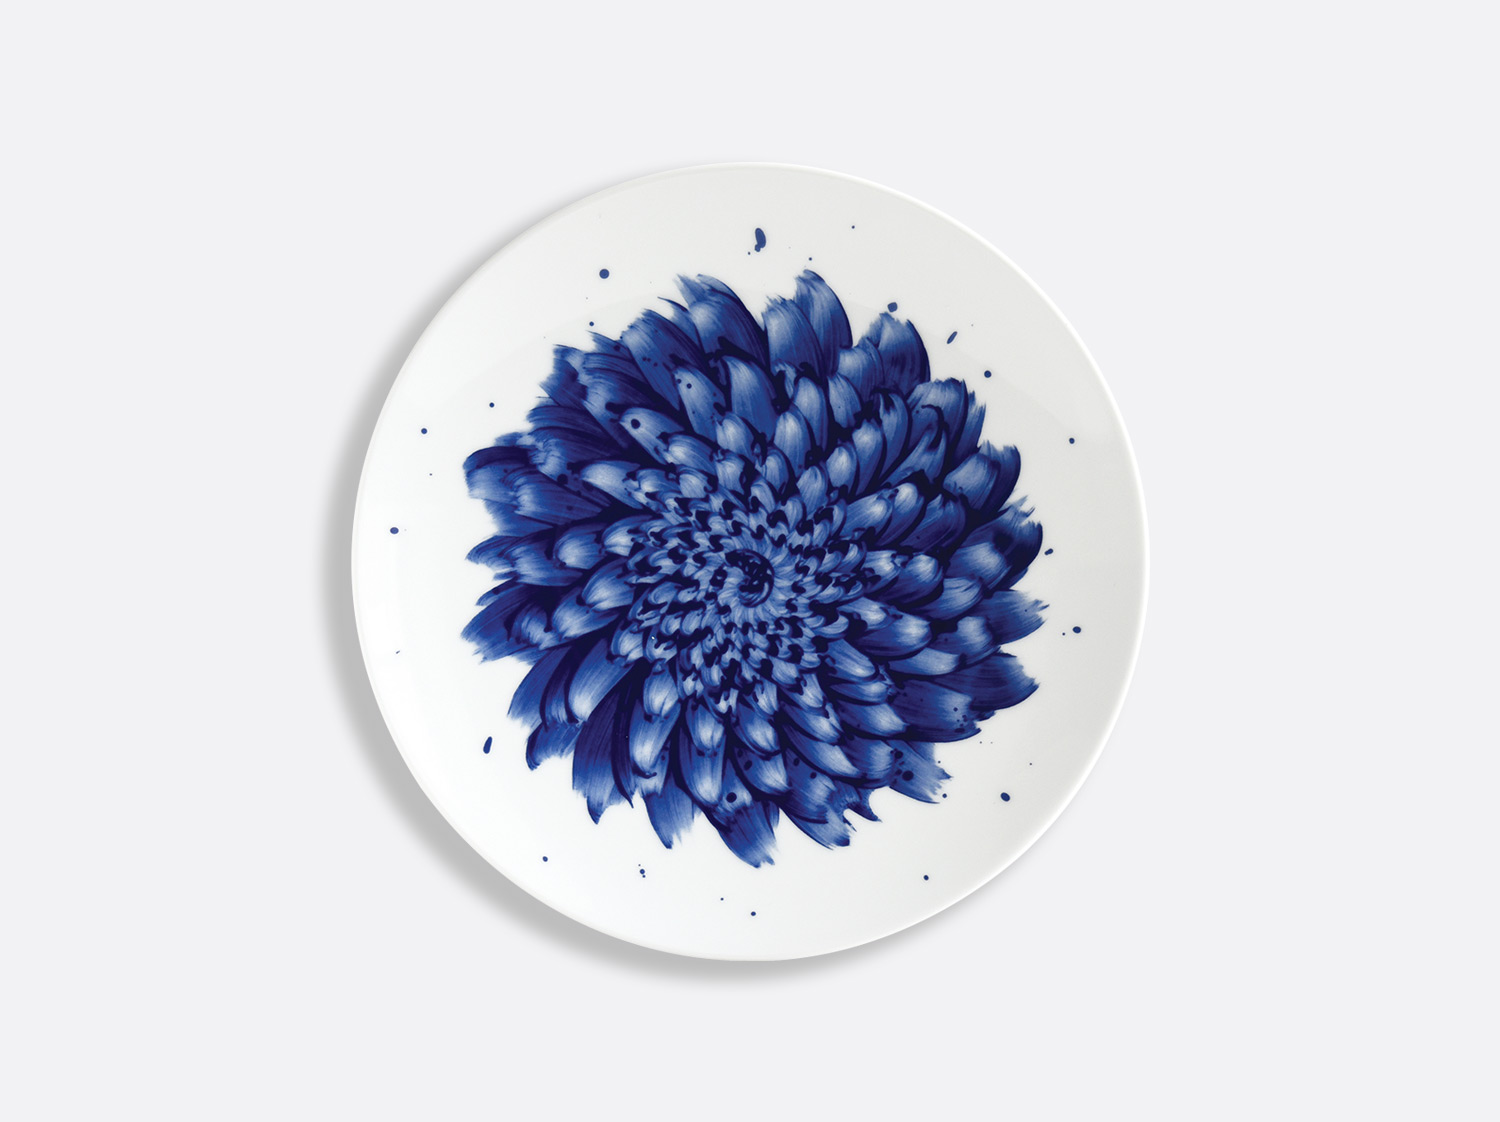 China Coupe salad plate 21 cm of the collection IN BLOOM - Zemer Peled | Bernardaud